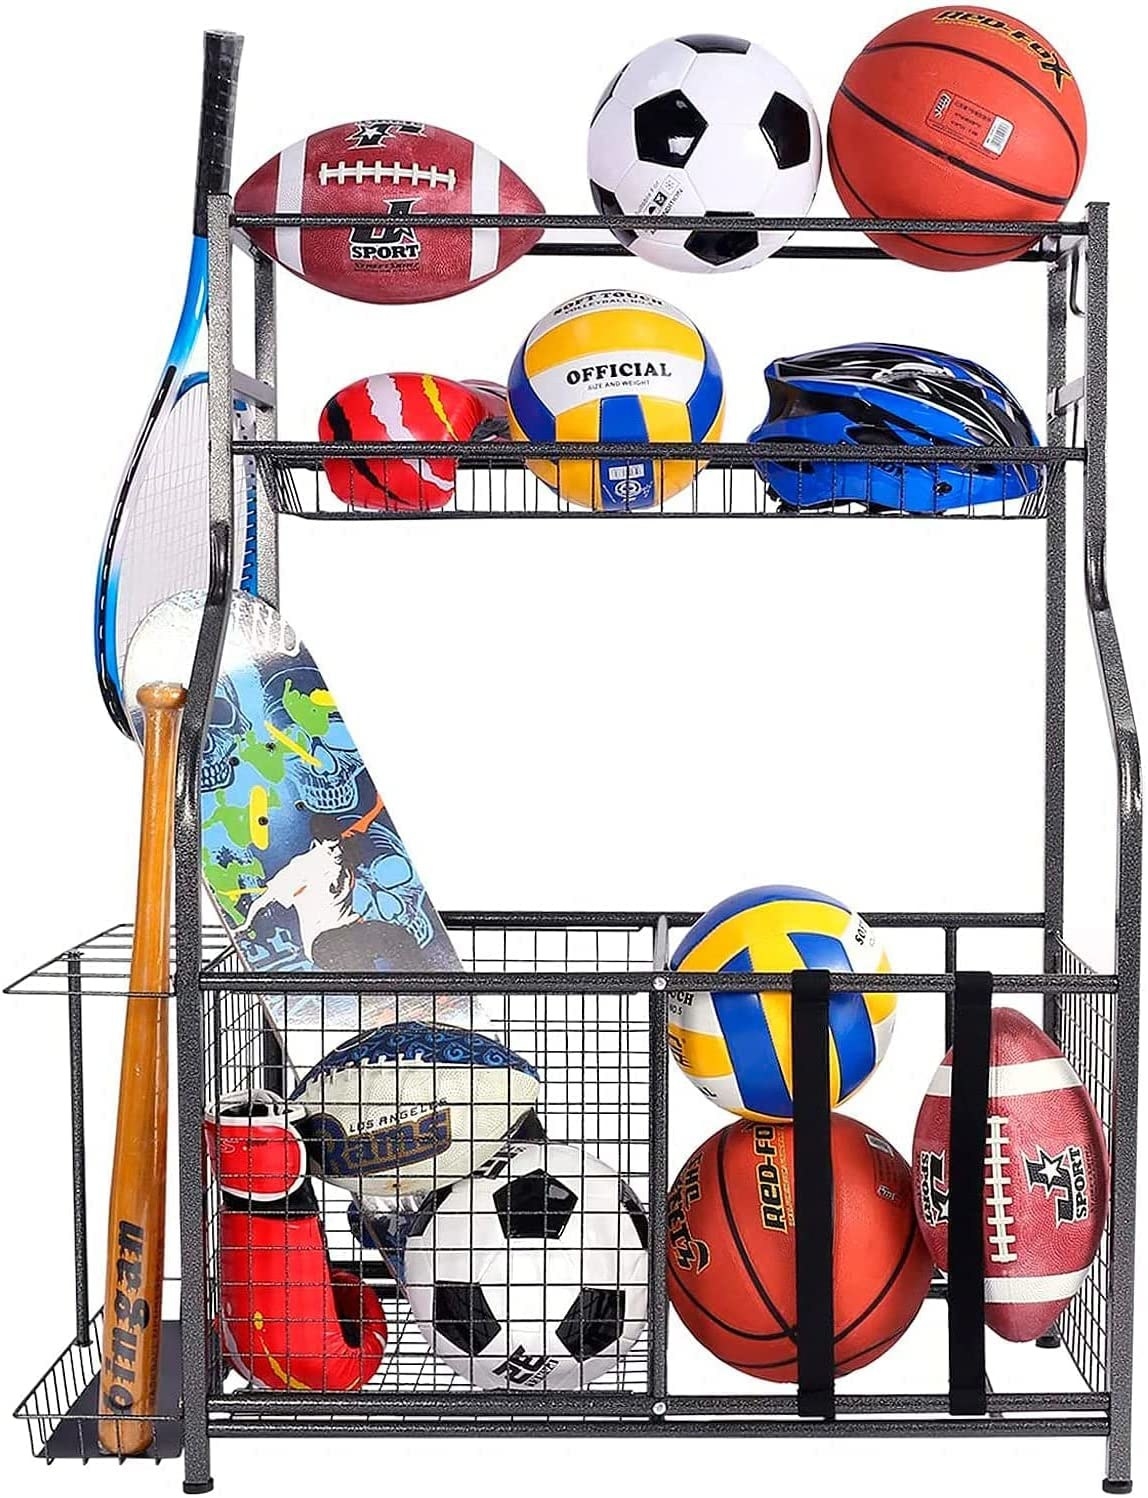 the rack against a plain background filled with sports equiptment